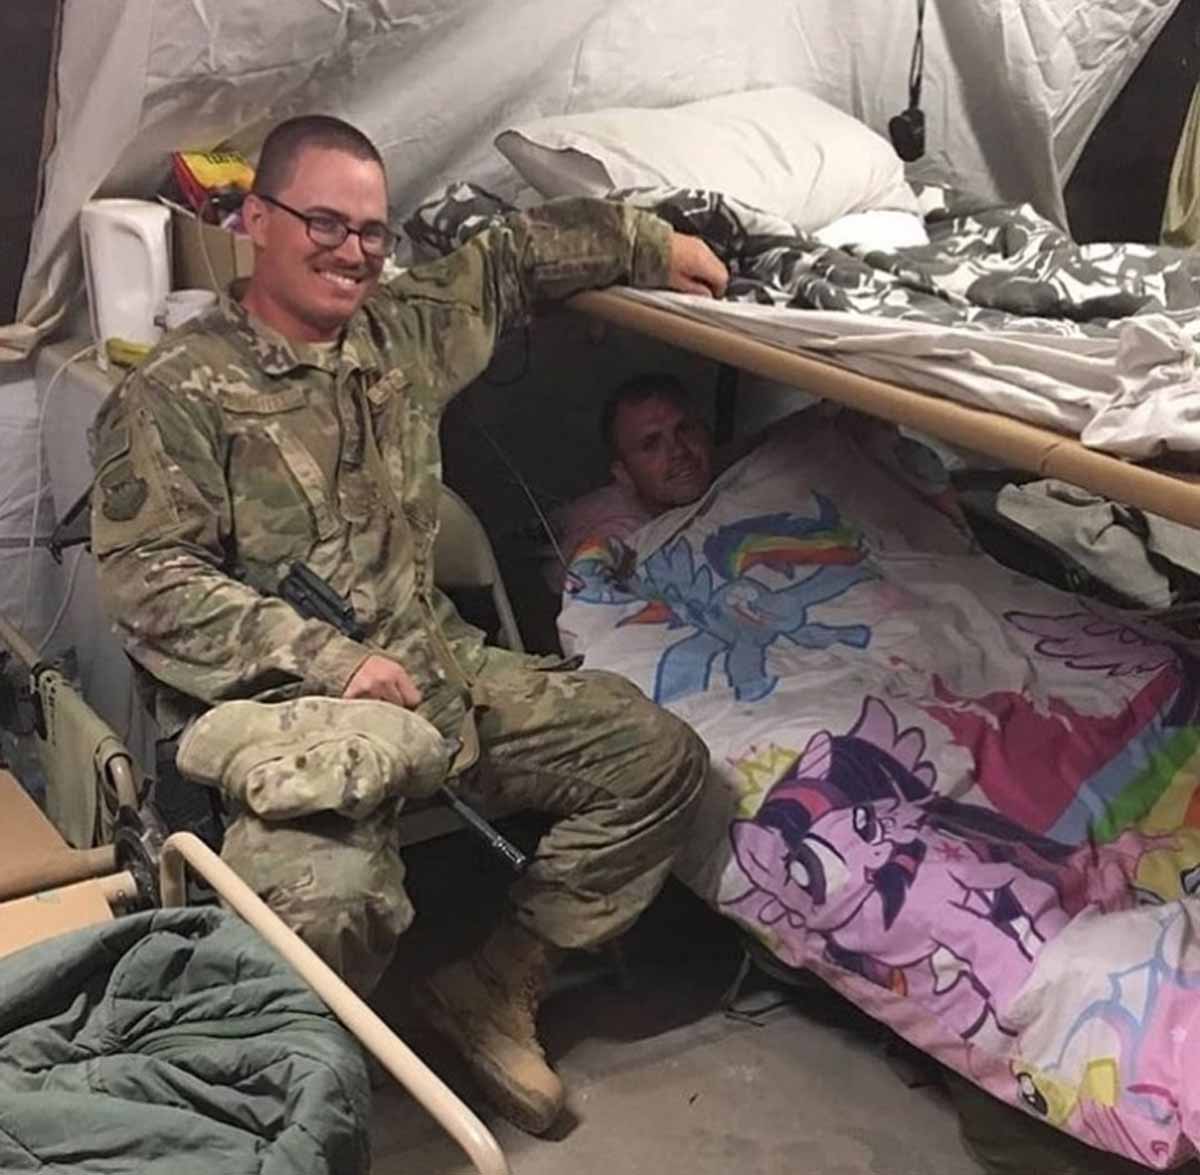 Funny picture of a soldier in his bunk with a my little pony blanket